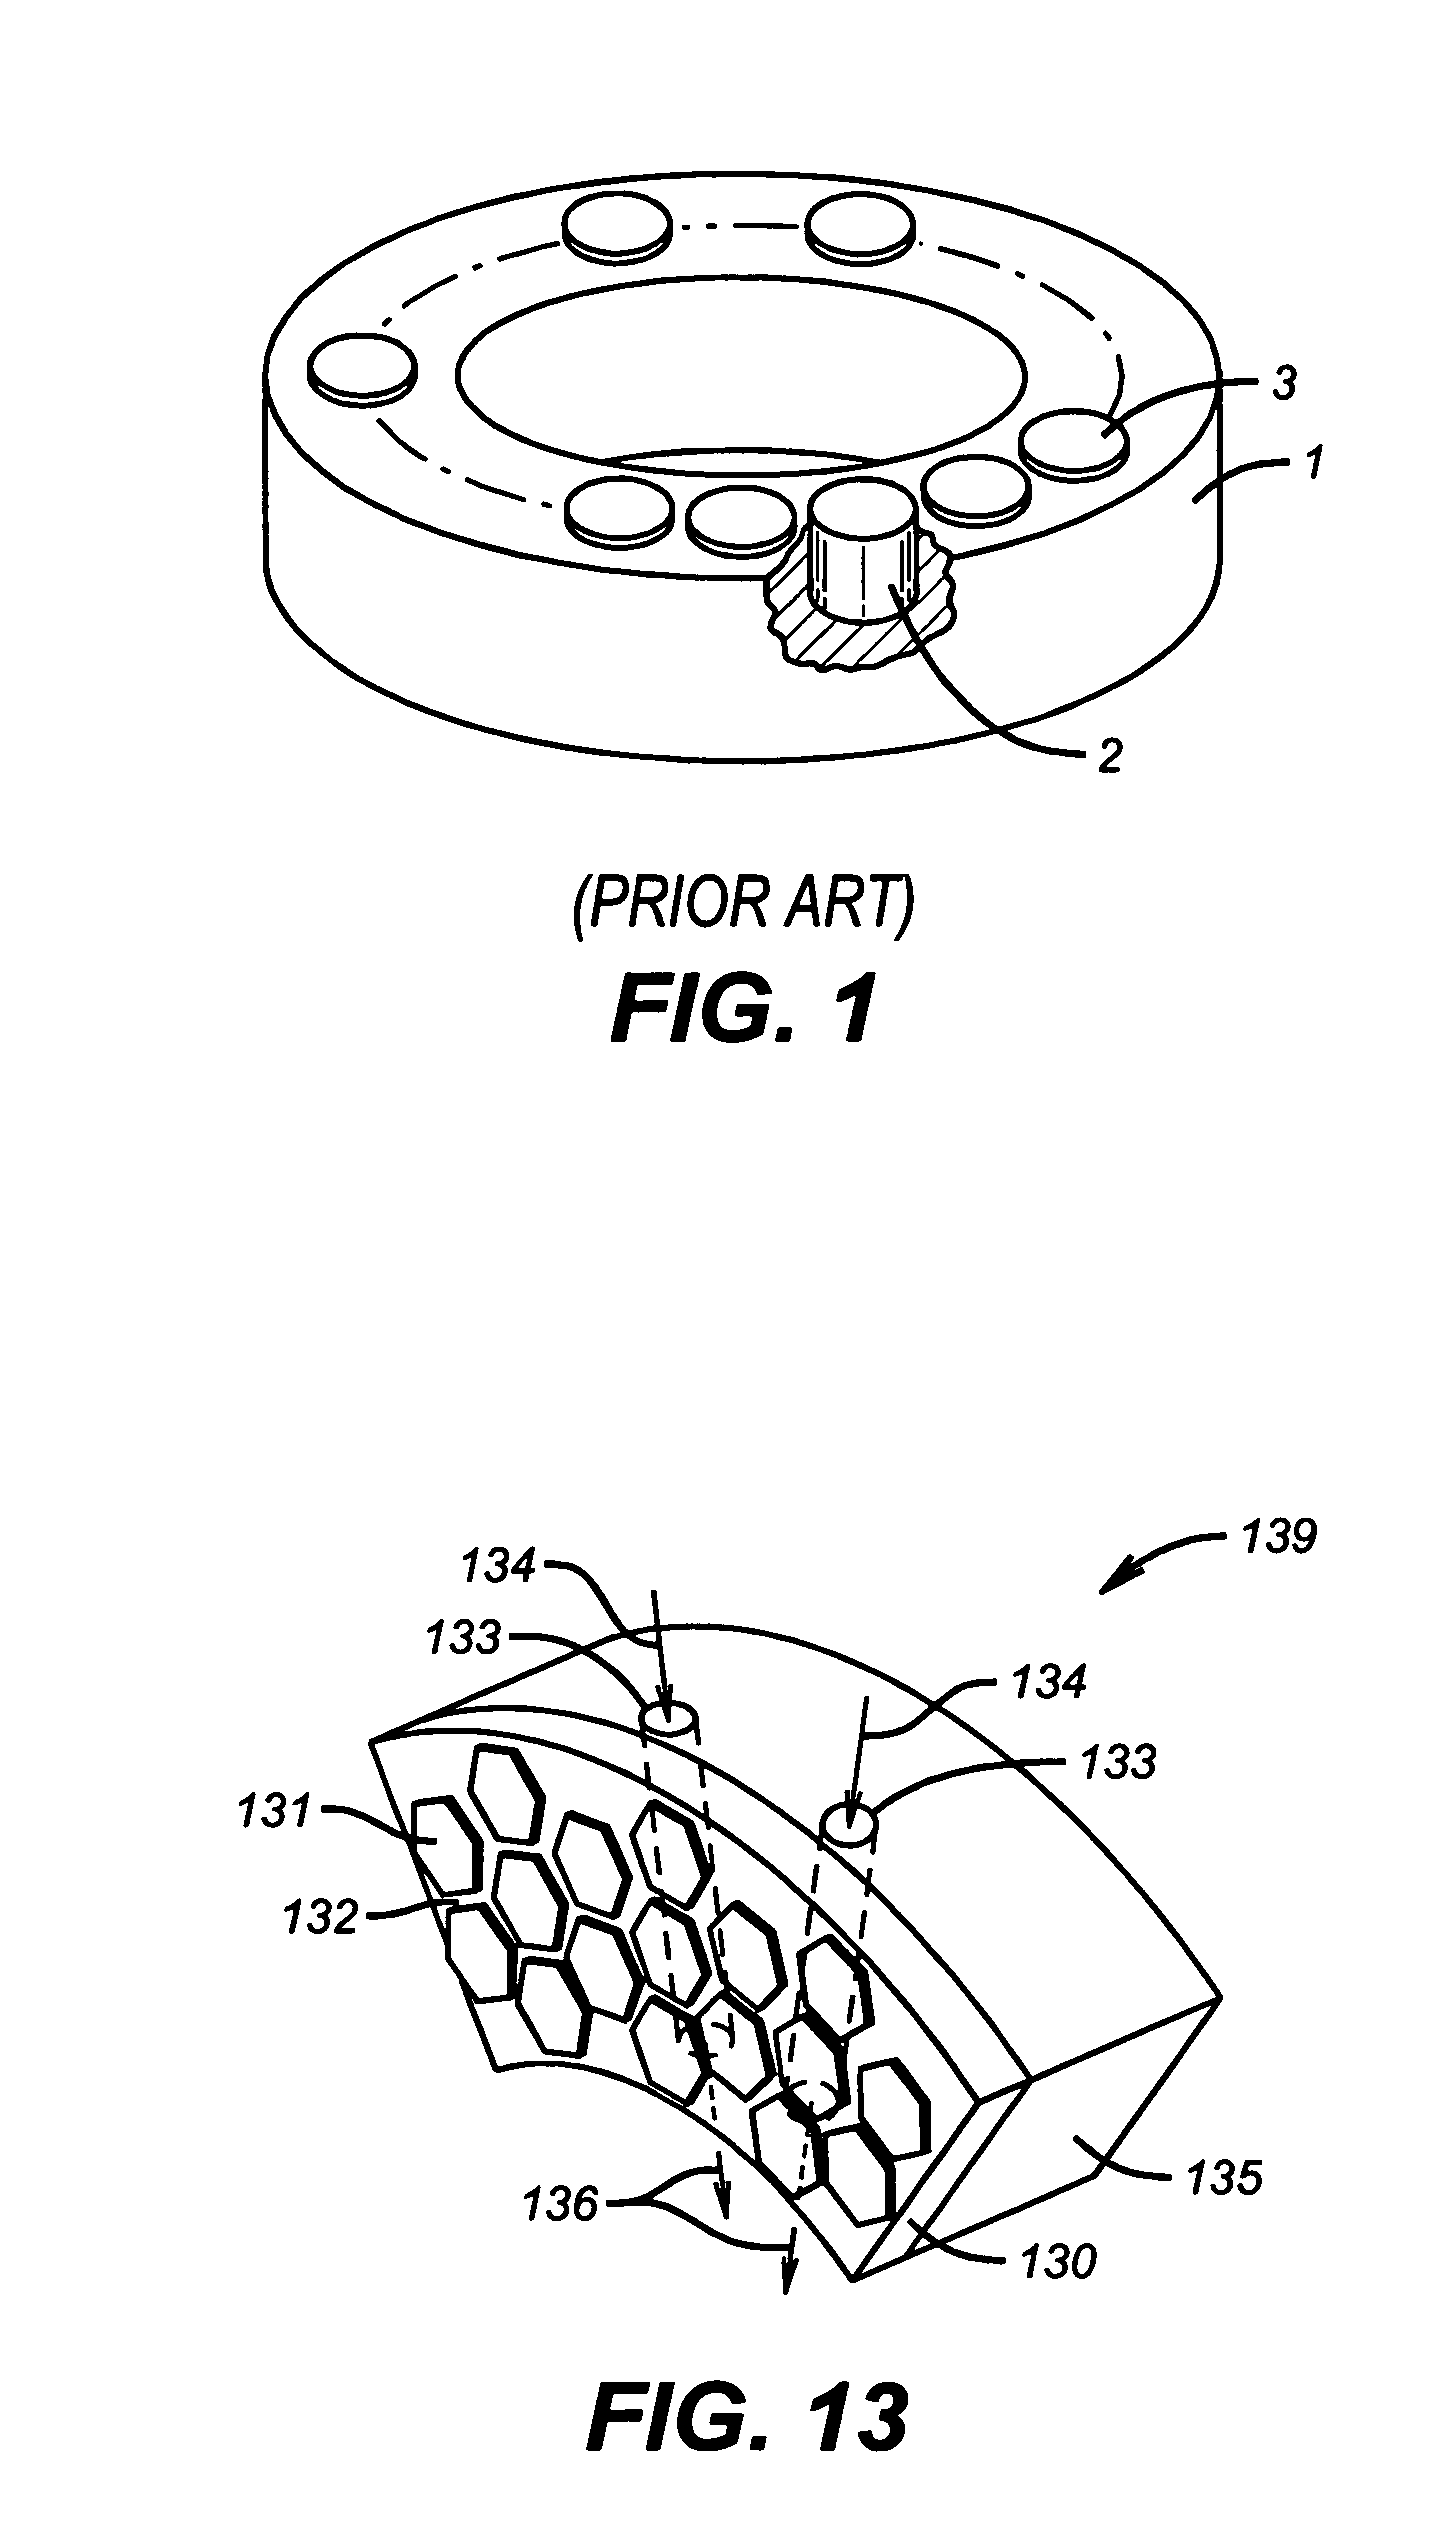 Diamond bearing with cooling/lubrication channels